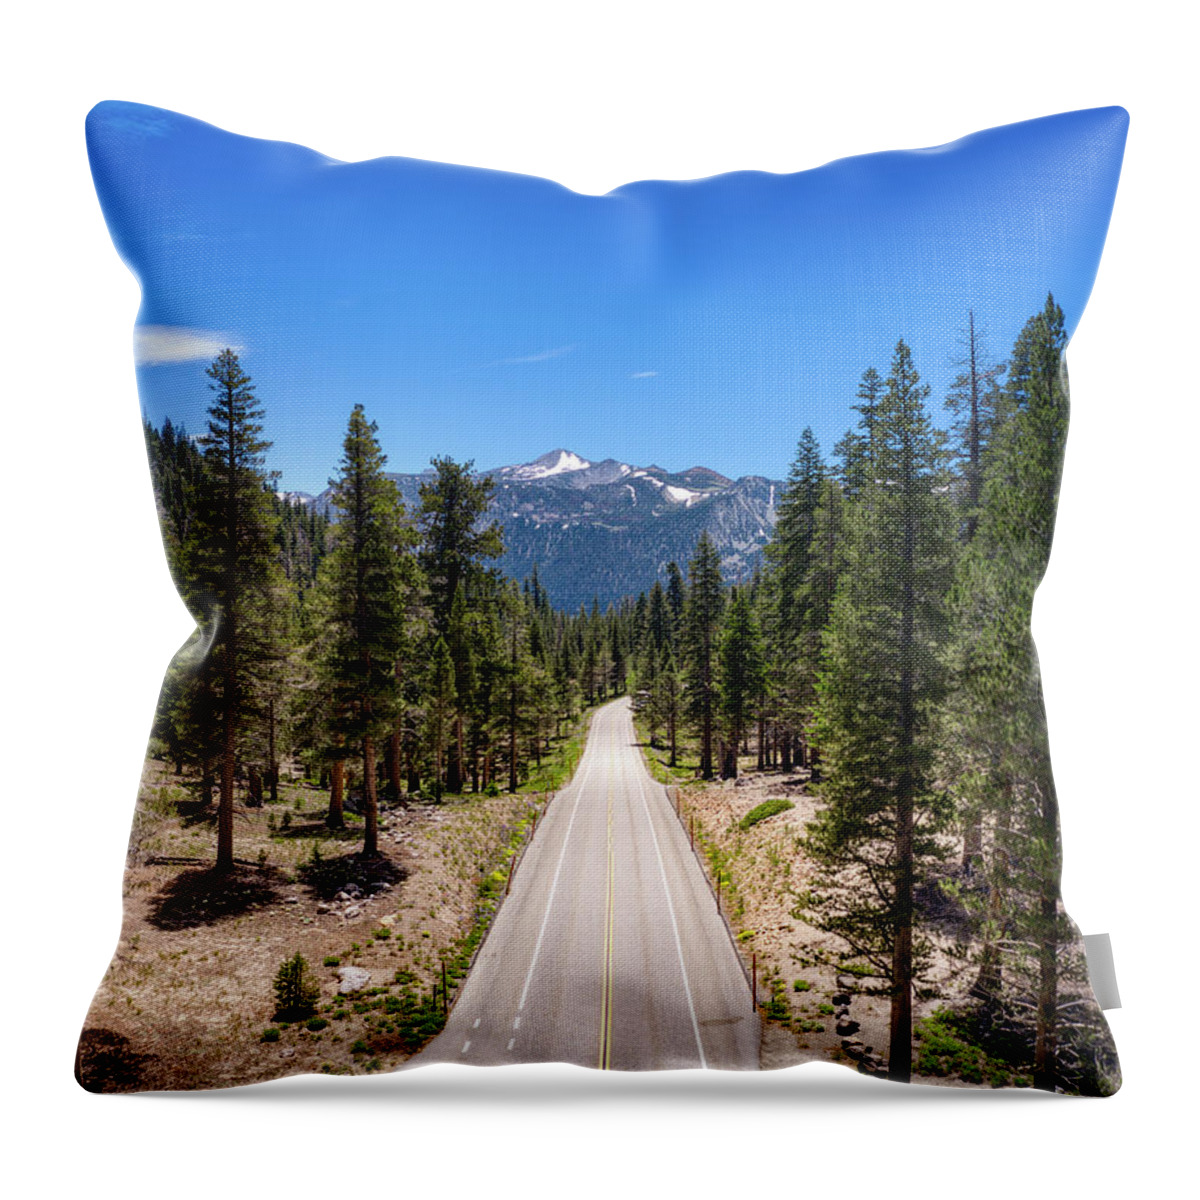 California Throw Pillow featuring the photograph Mammoth Lakes Scenic Loop Sierra Nevada View by Anthony Giammarino